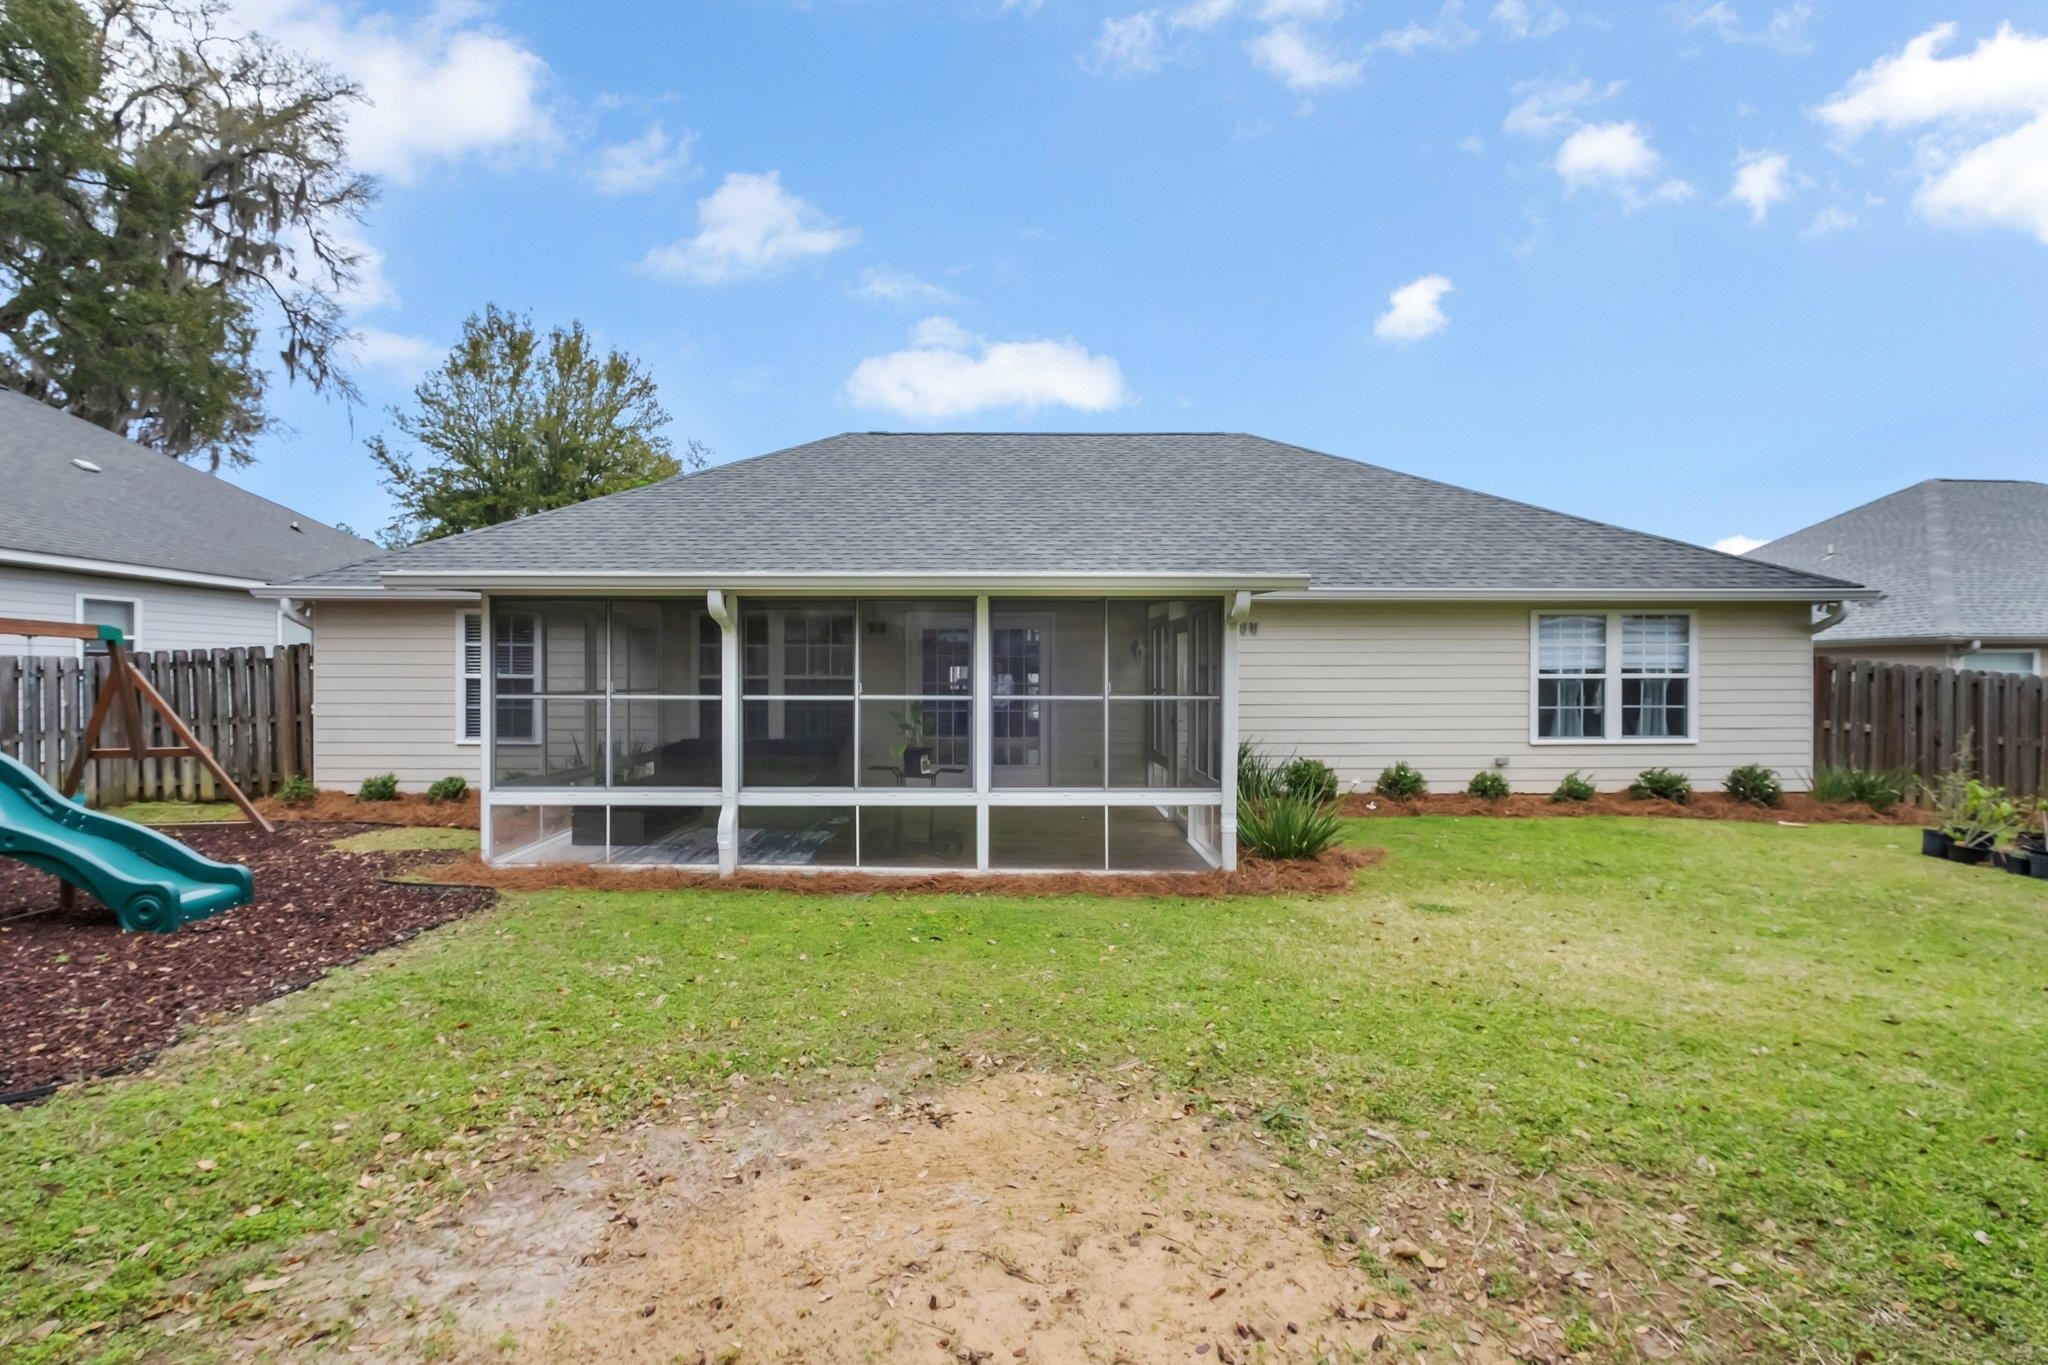 1104 March Road,TALLAHASSEE,Florida 32311,4 Bedrooms Bedrooms,2 BathroomsBathrooms,Detached single family,1104 March Road,369244